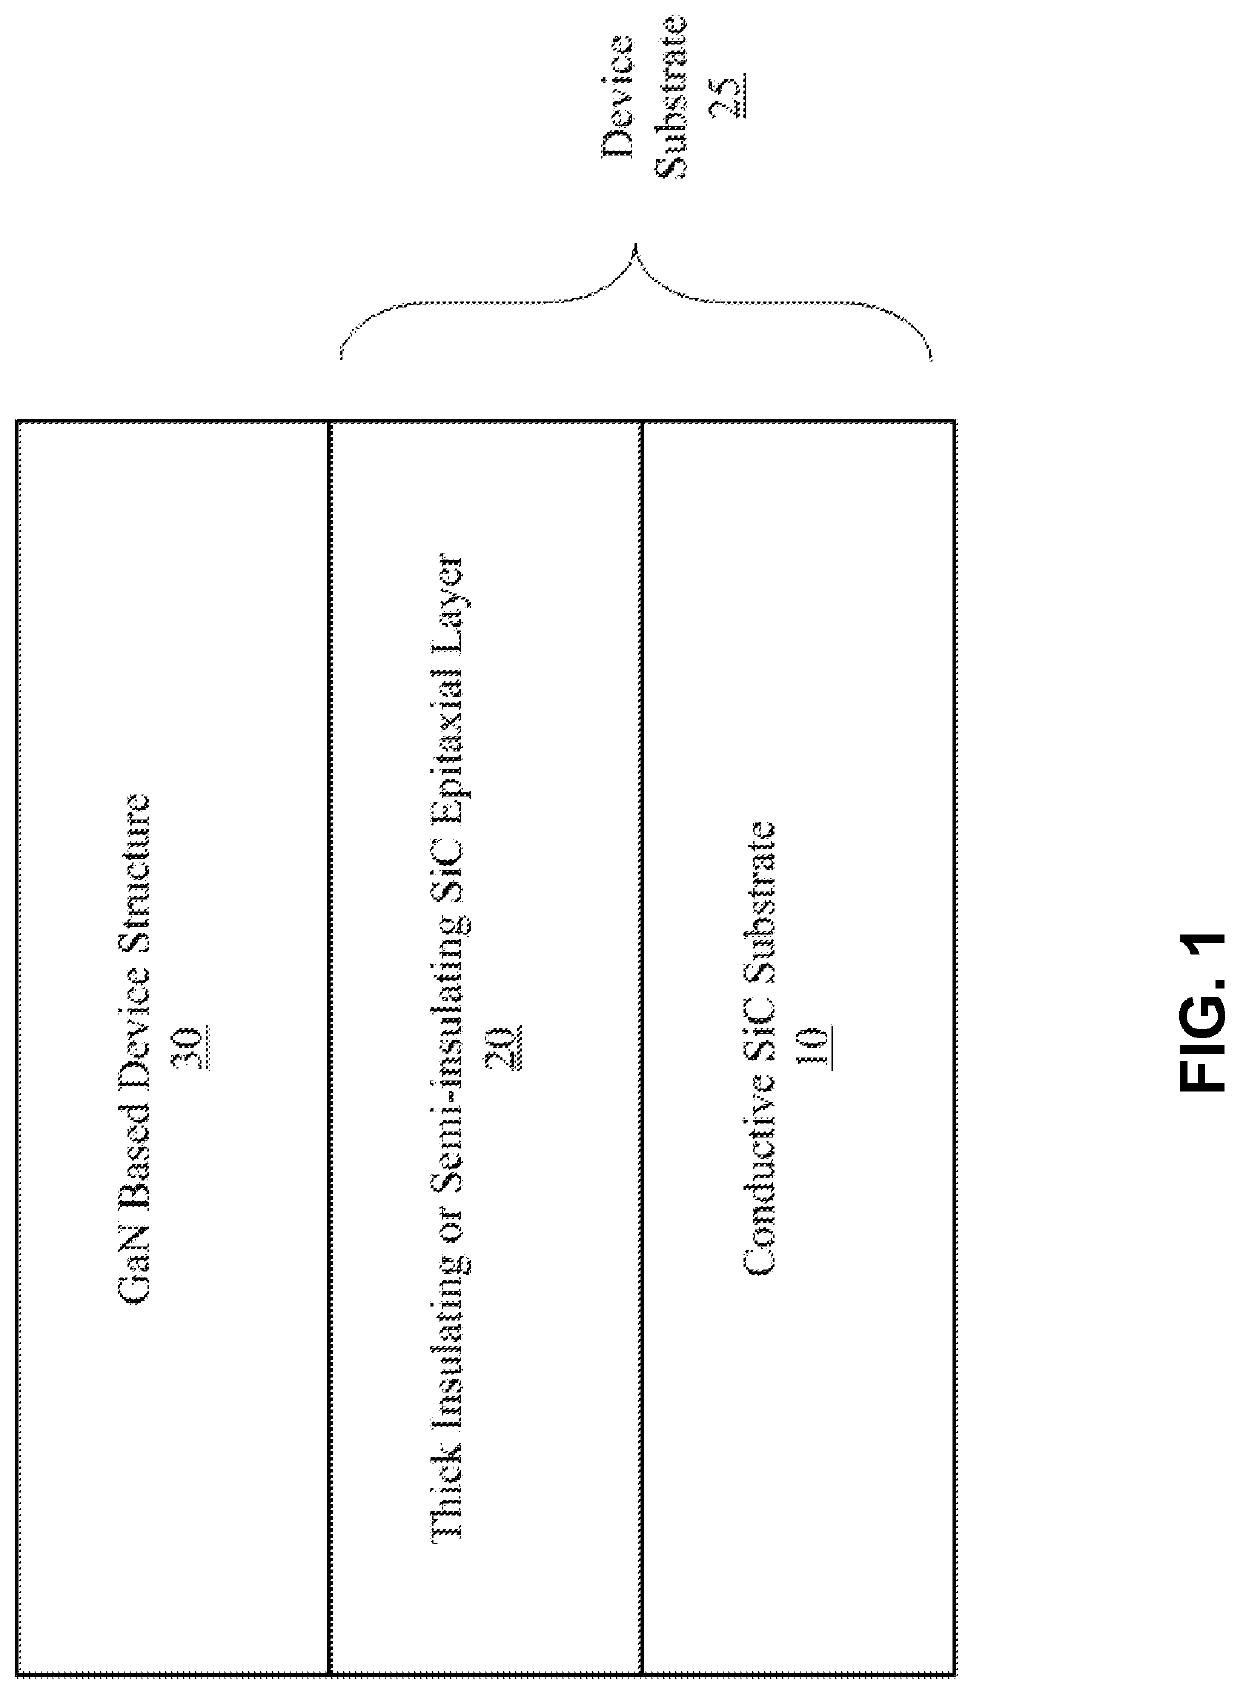 Composite substrates of conductive and insulating or semi-insulating silicon carbide for gallium nitride devices